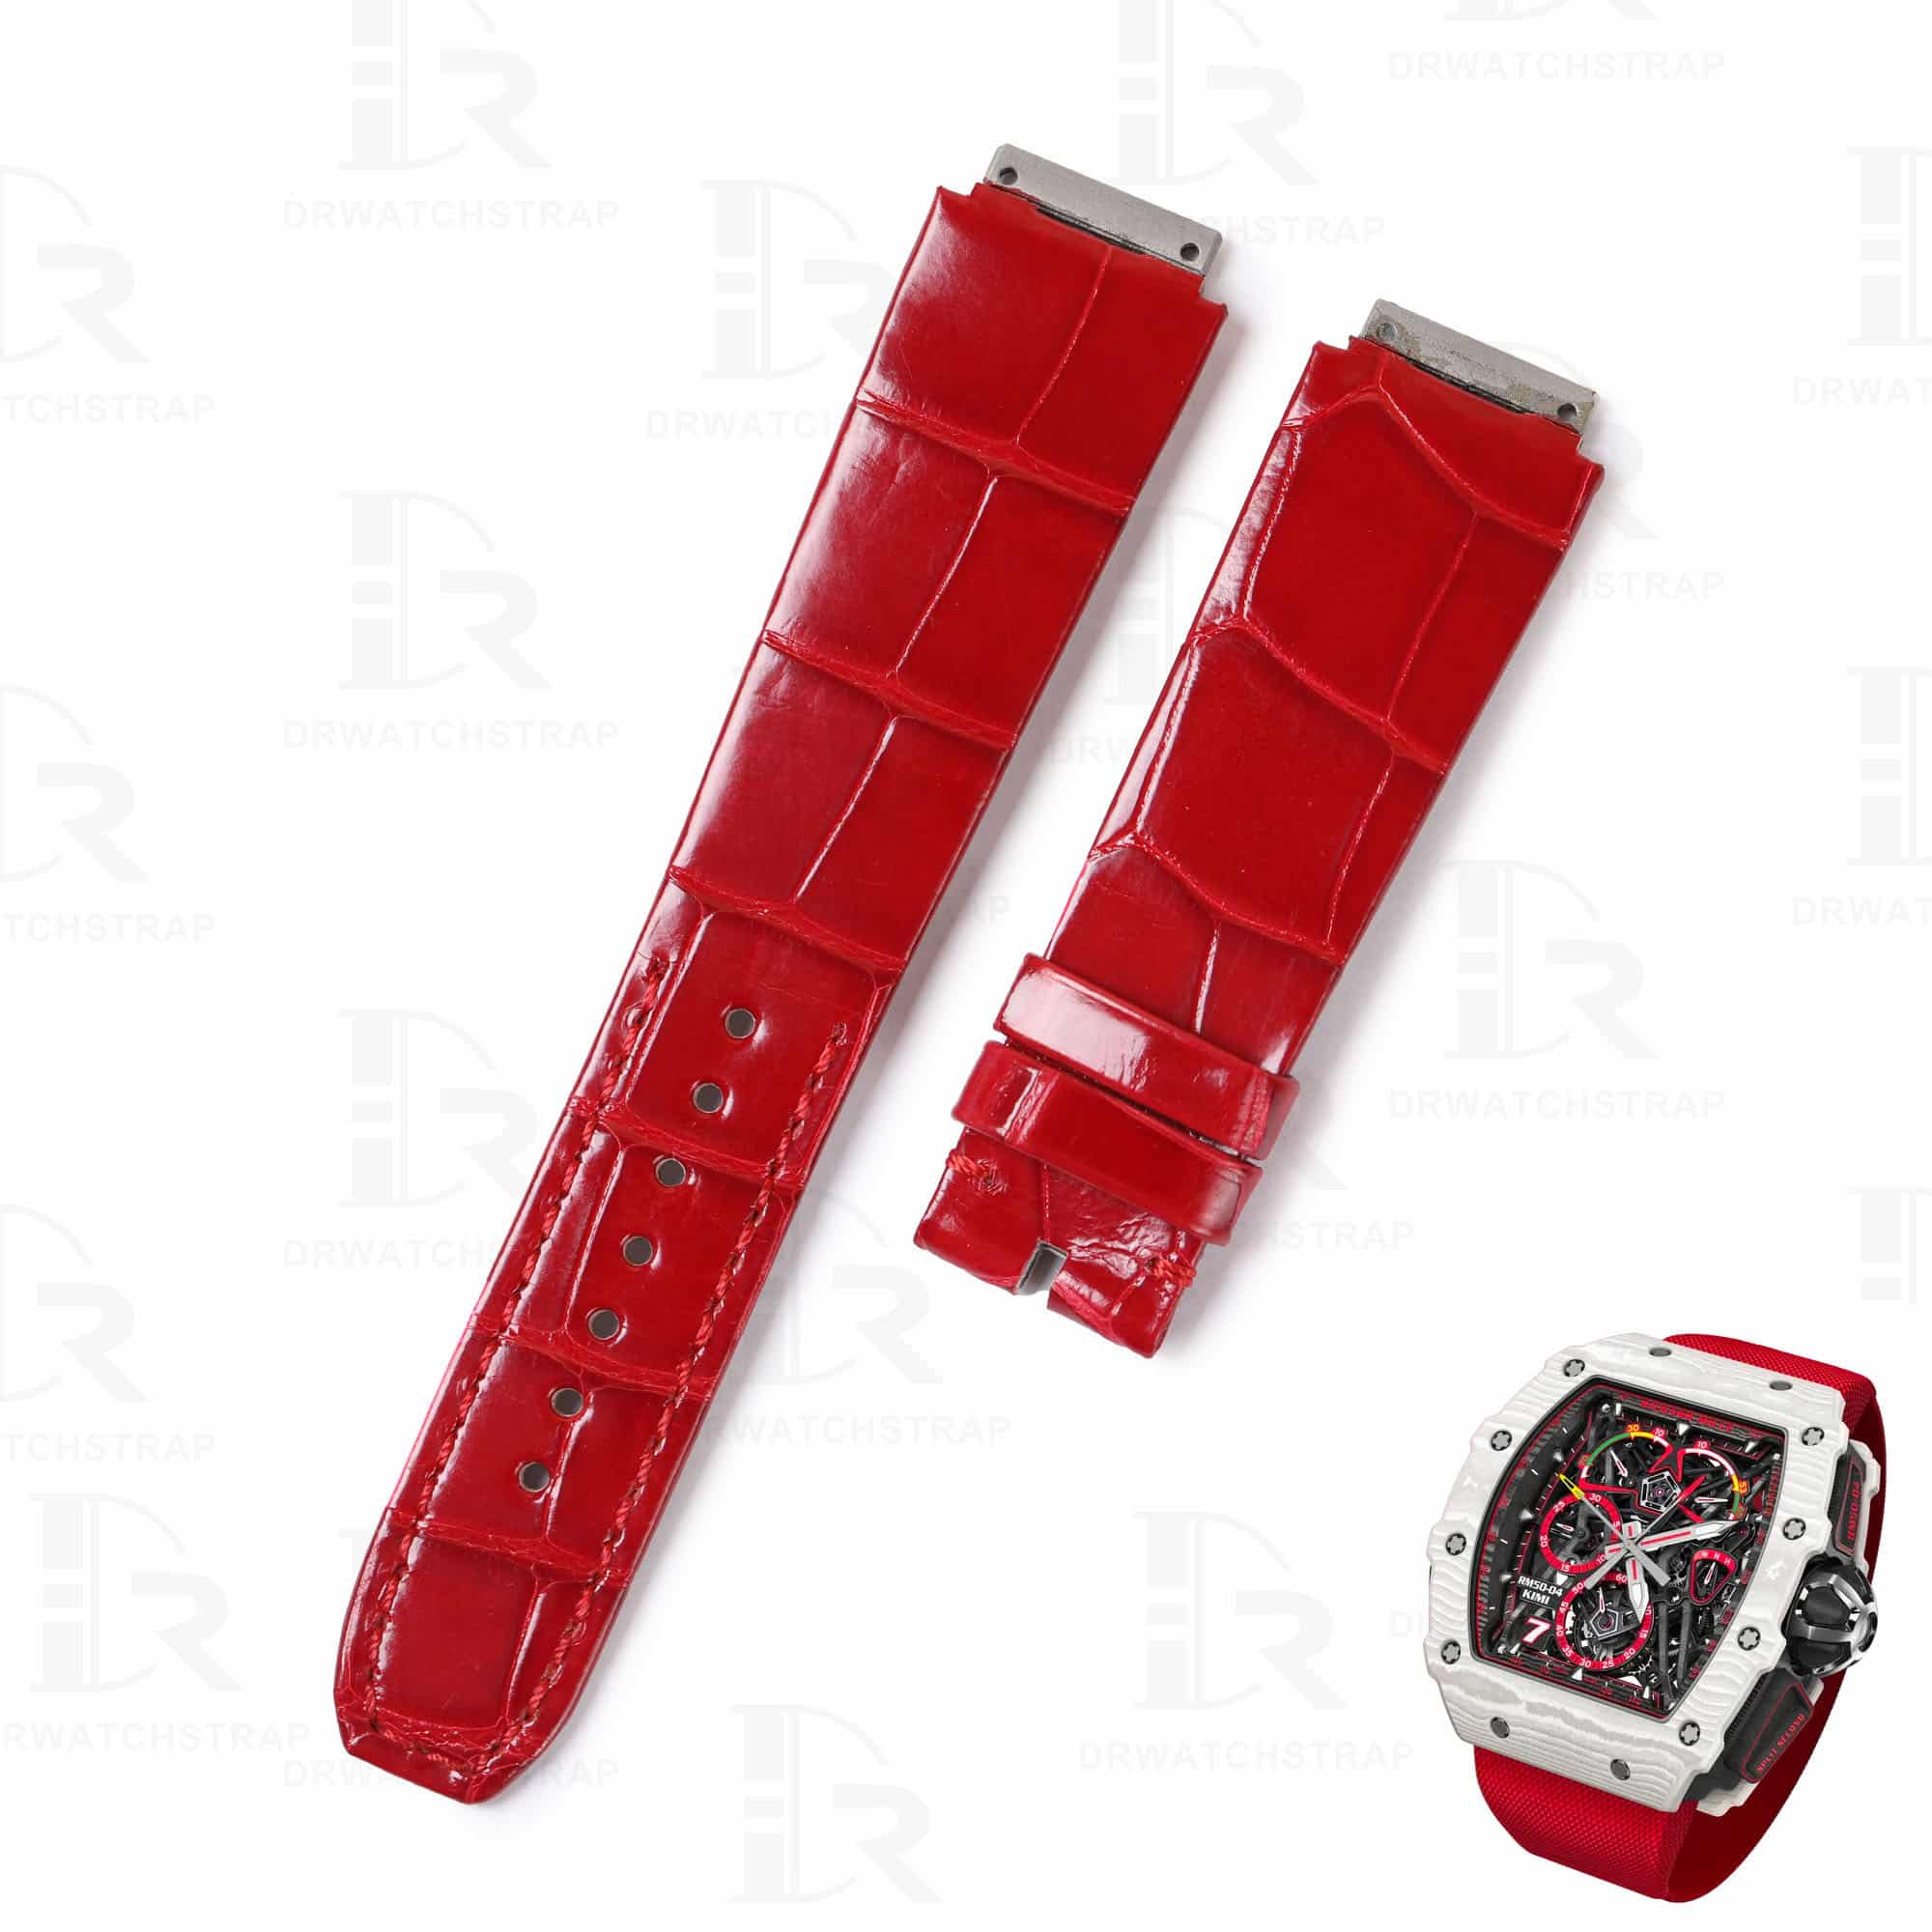 Replacement crocodile alligator belly-scale red leather straps for Richard Mille watchbands